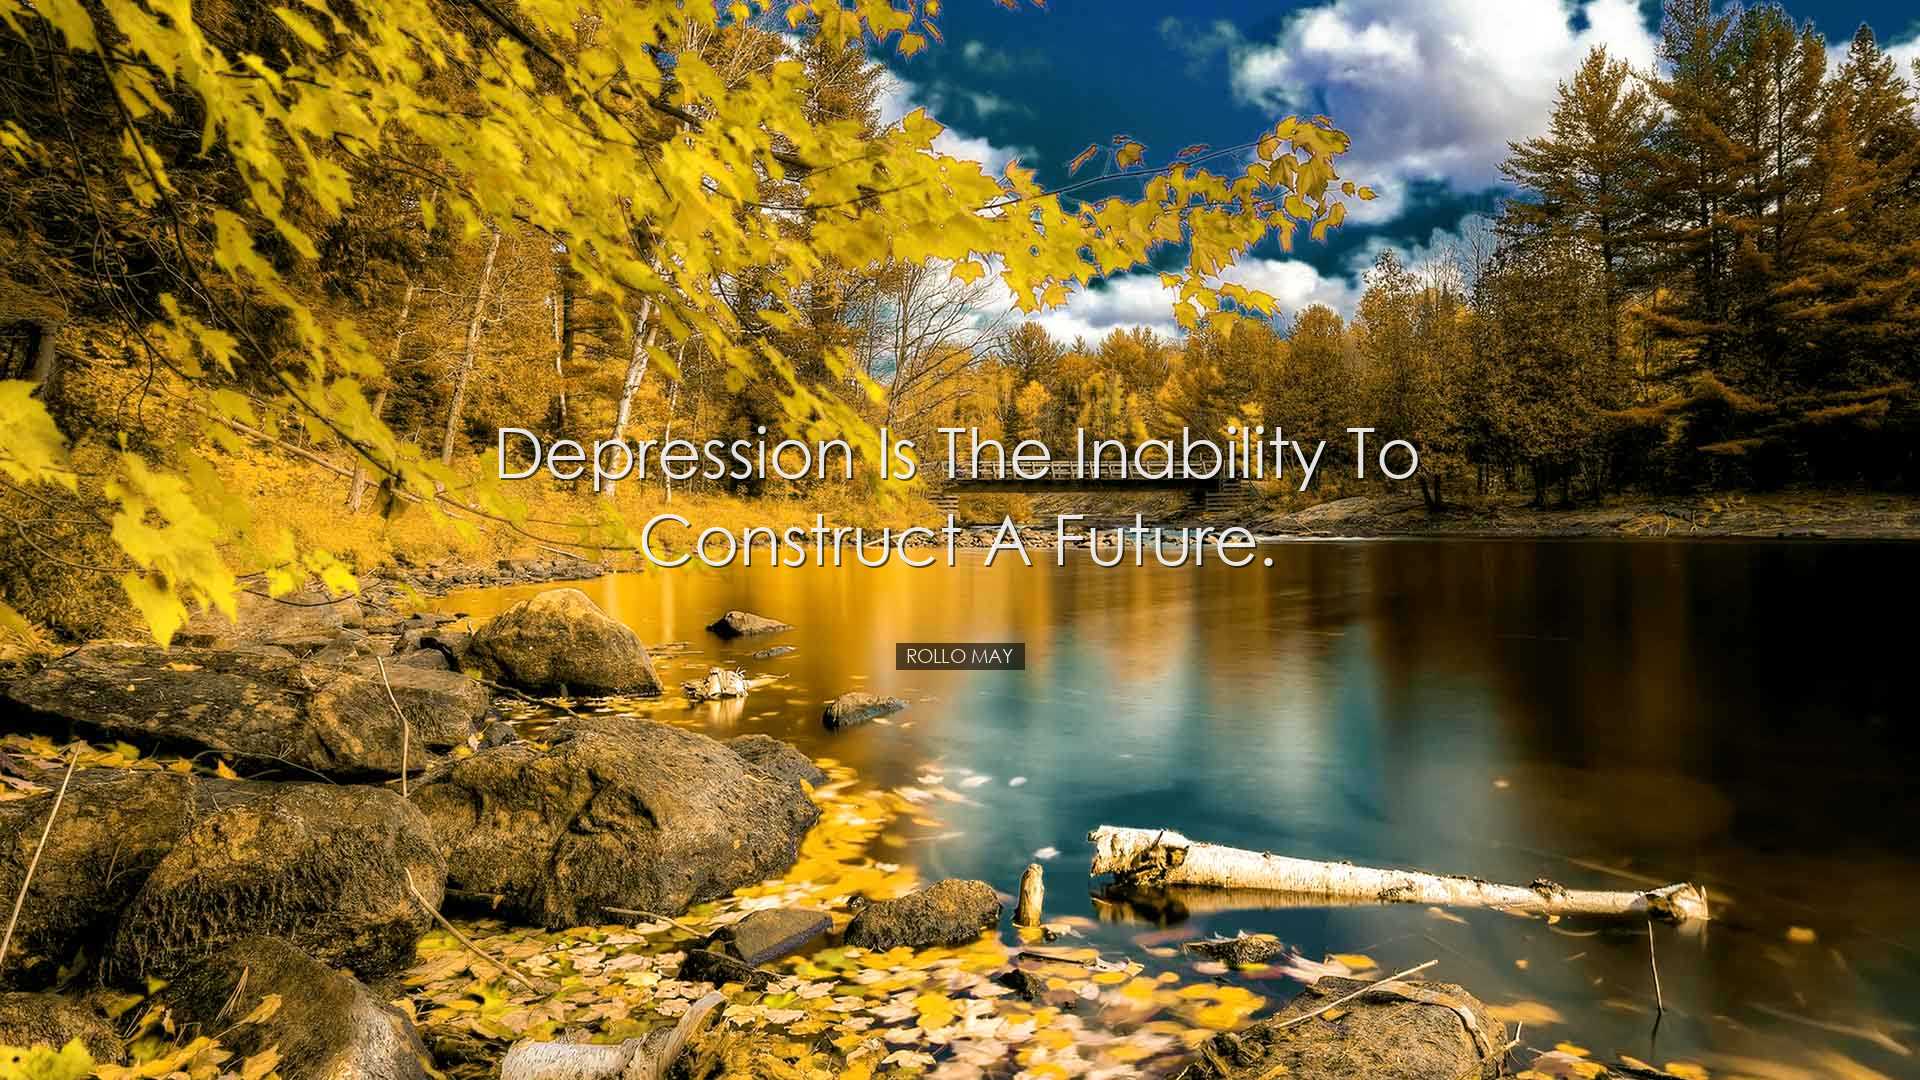 Depression is the inability to construct a future. - Rollo May